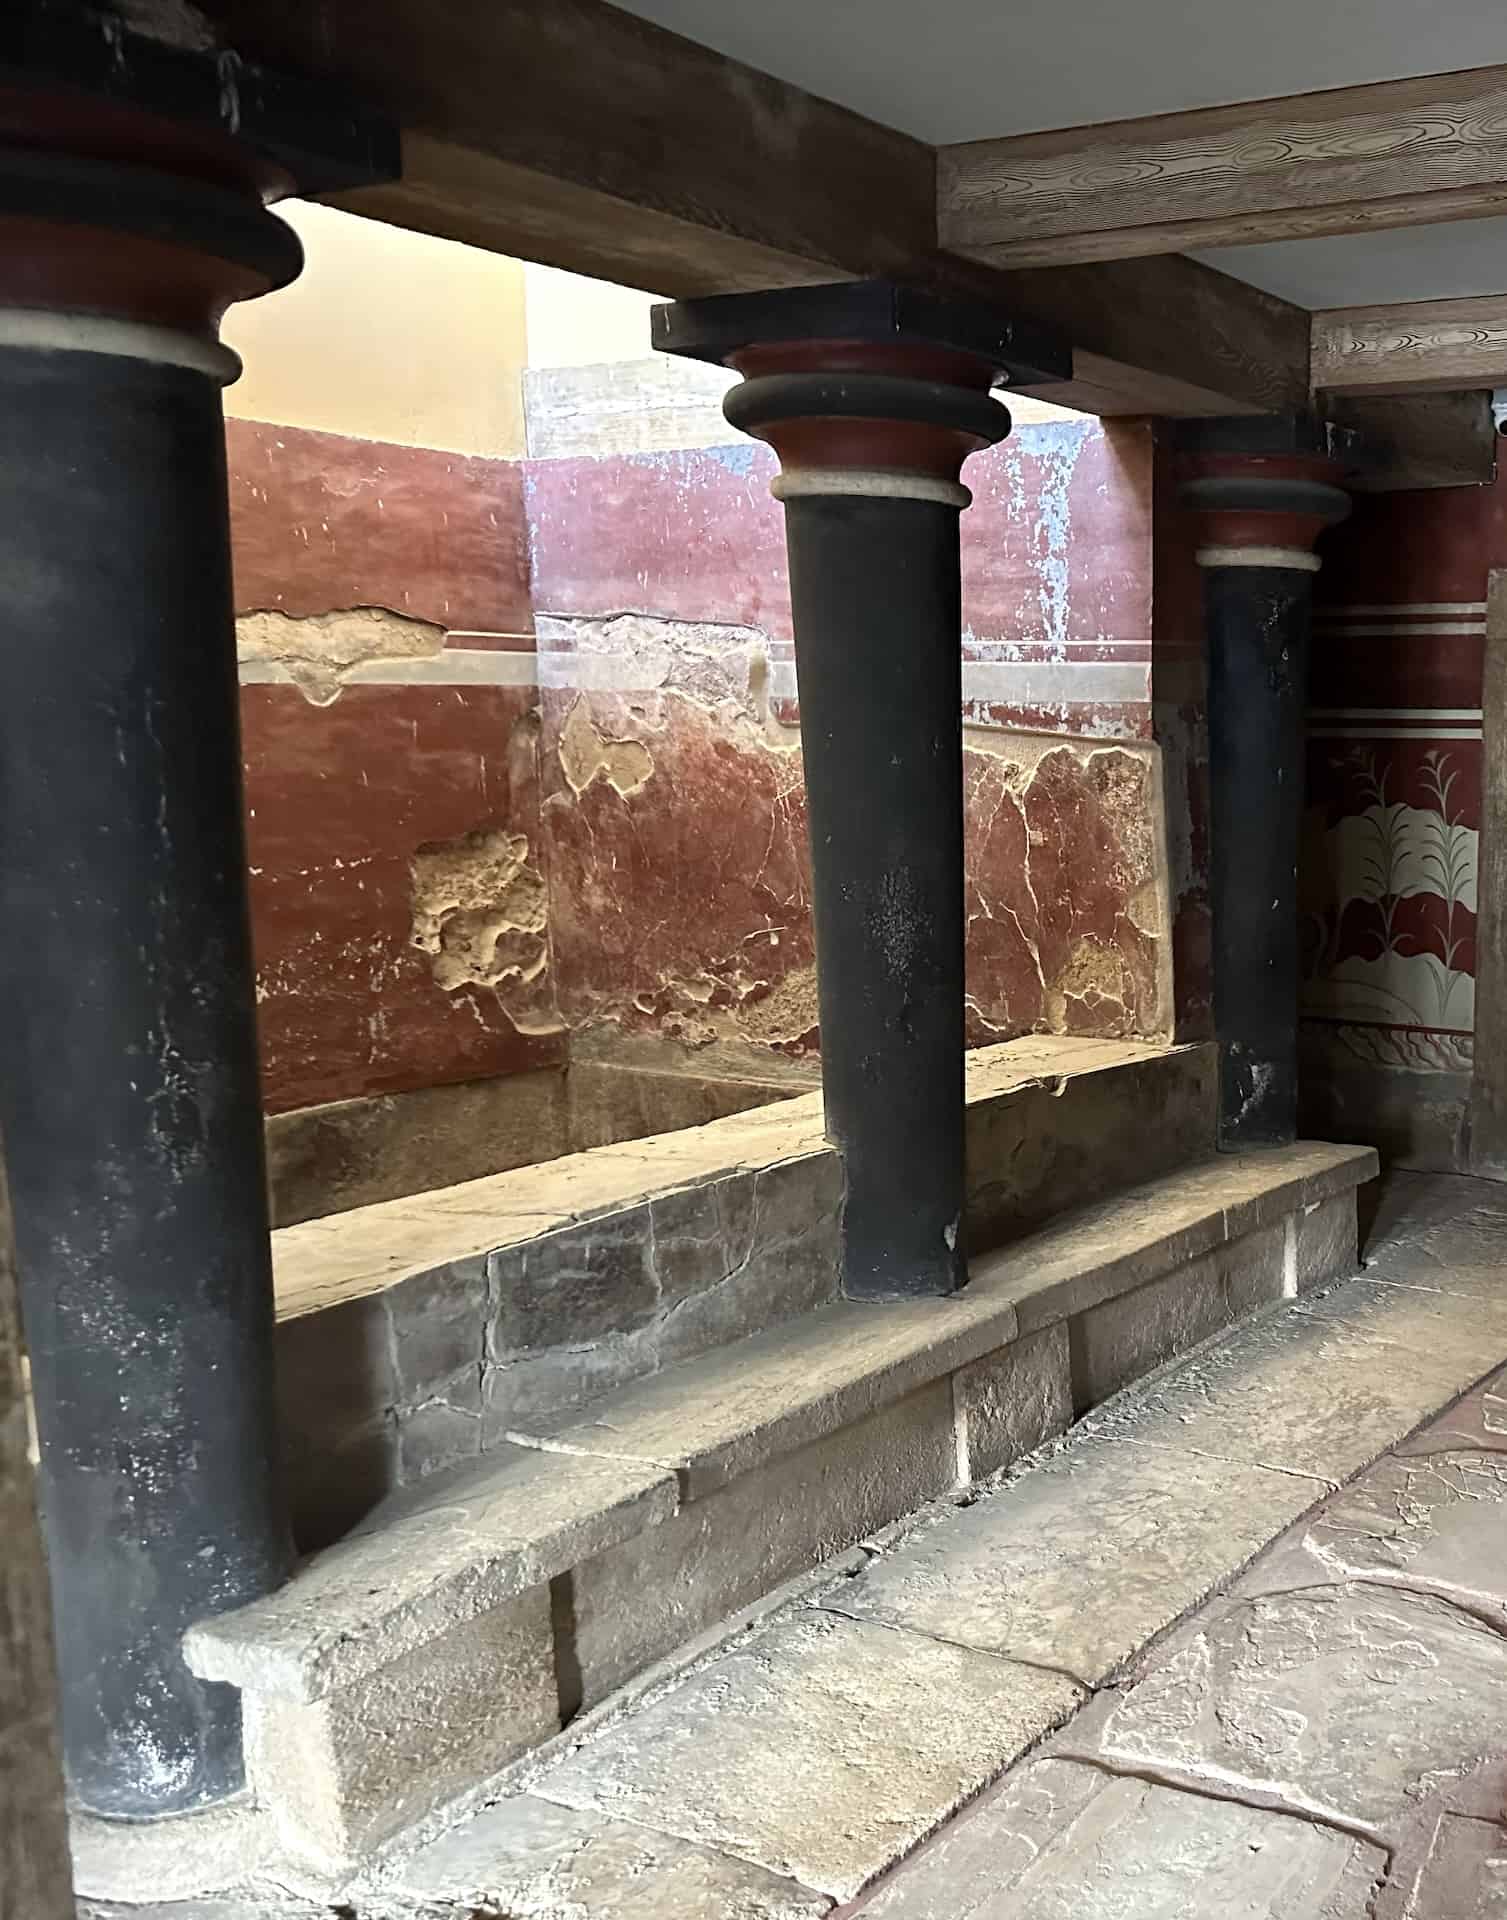 Columns in the main room of the Throne Room